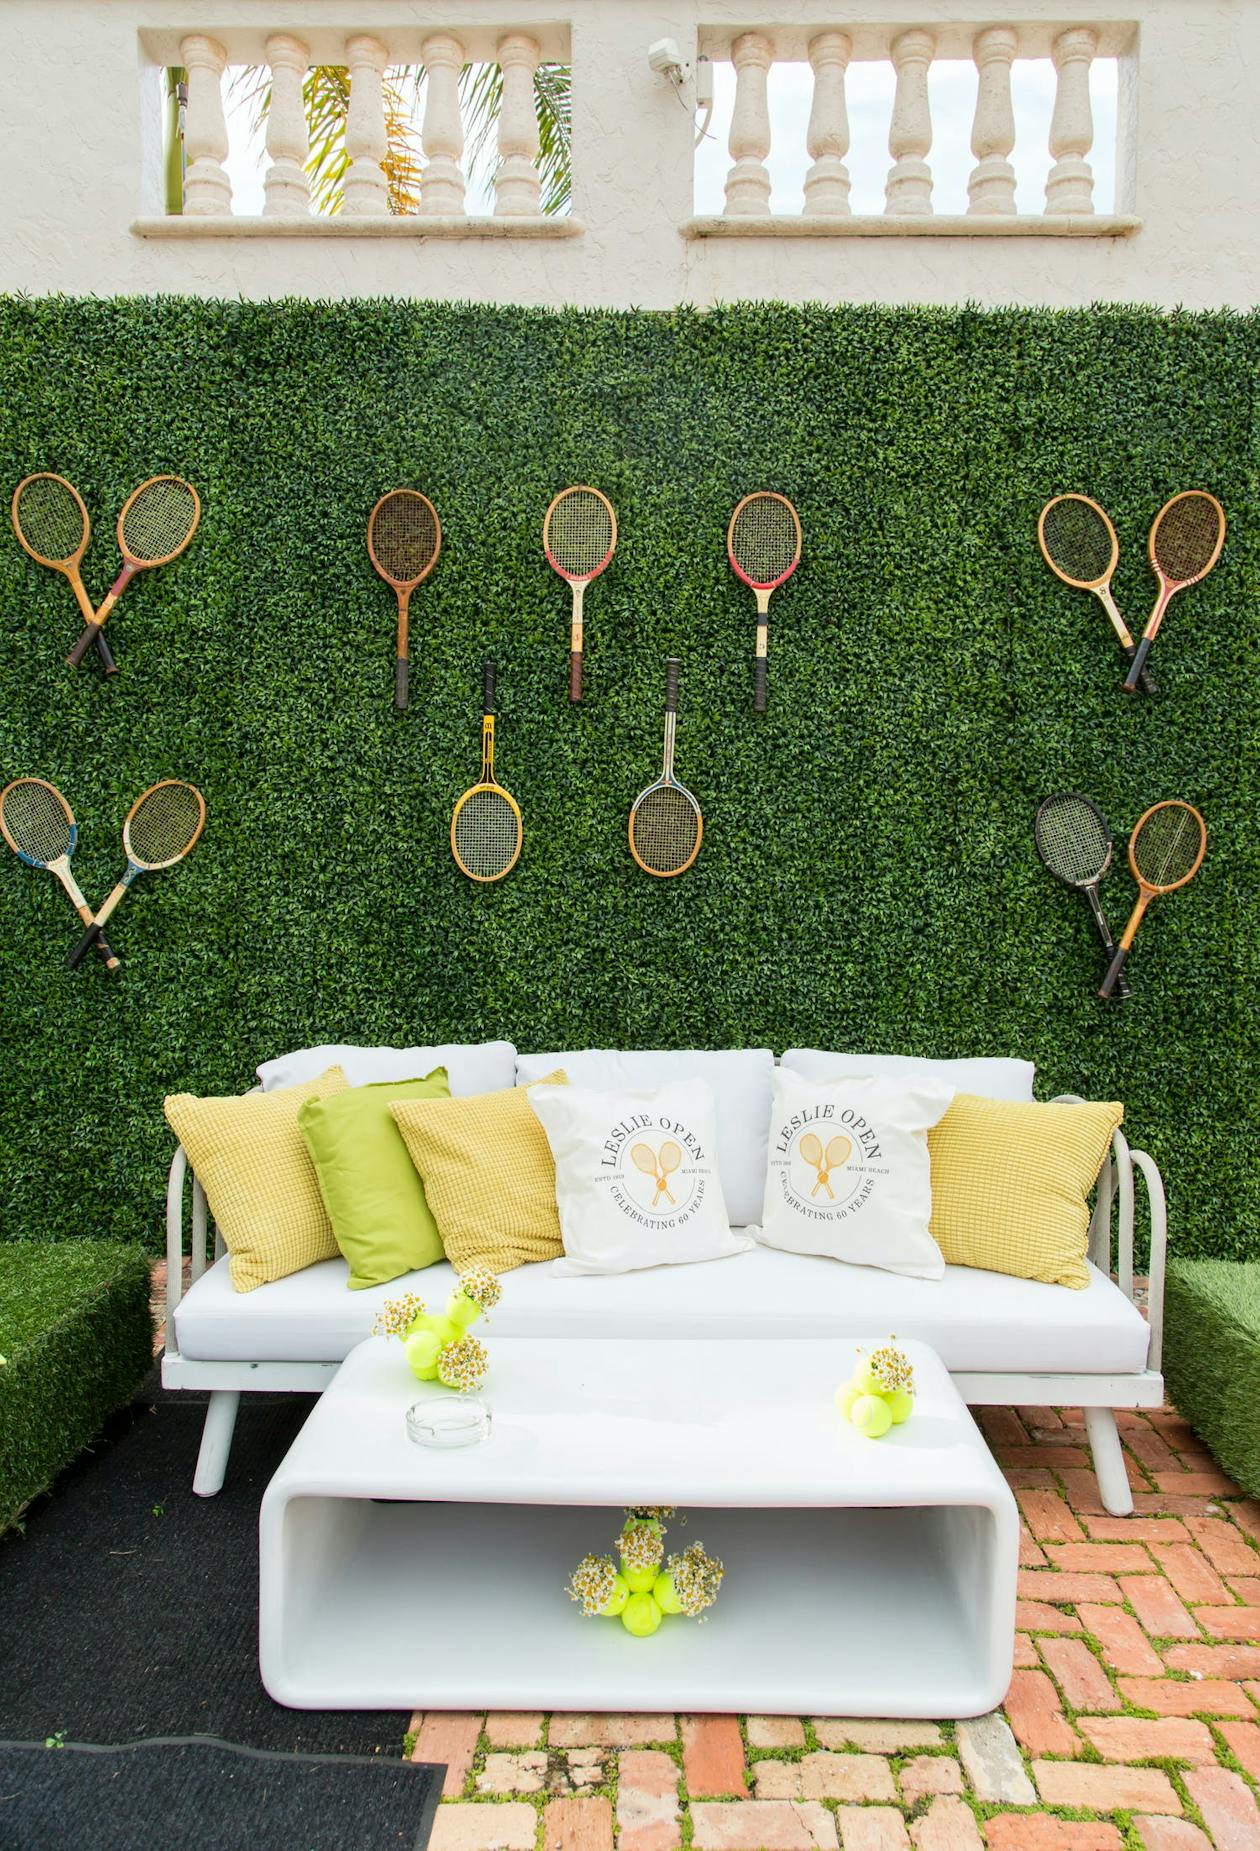 Tennis Tournament Themed Party With Tennis Racket Greenery Wall and Couch in Front | PartySlate